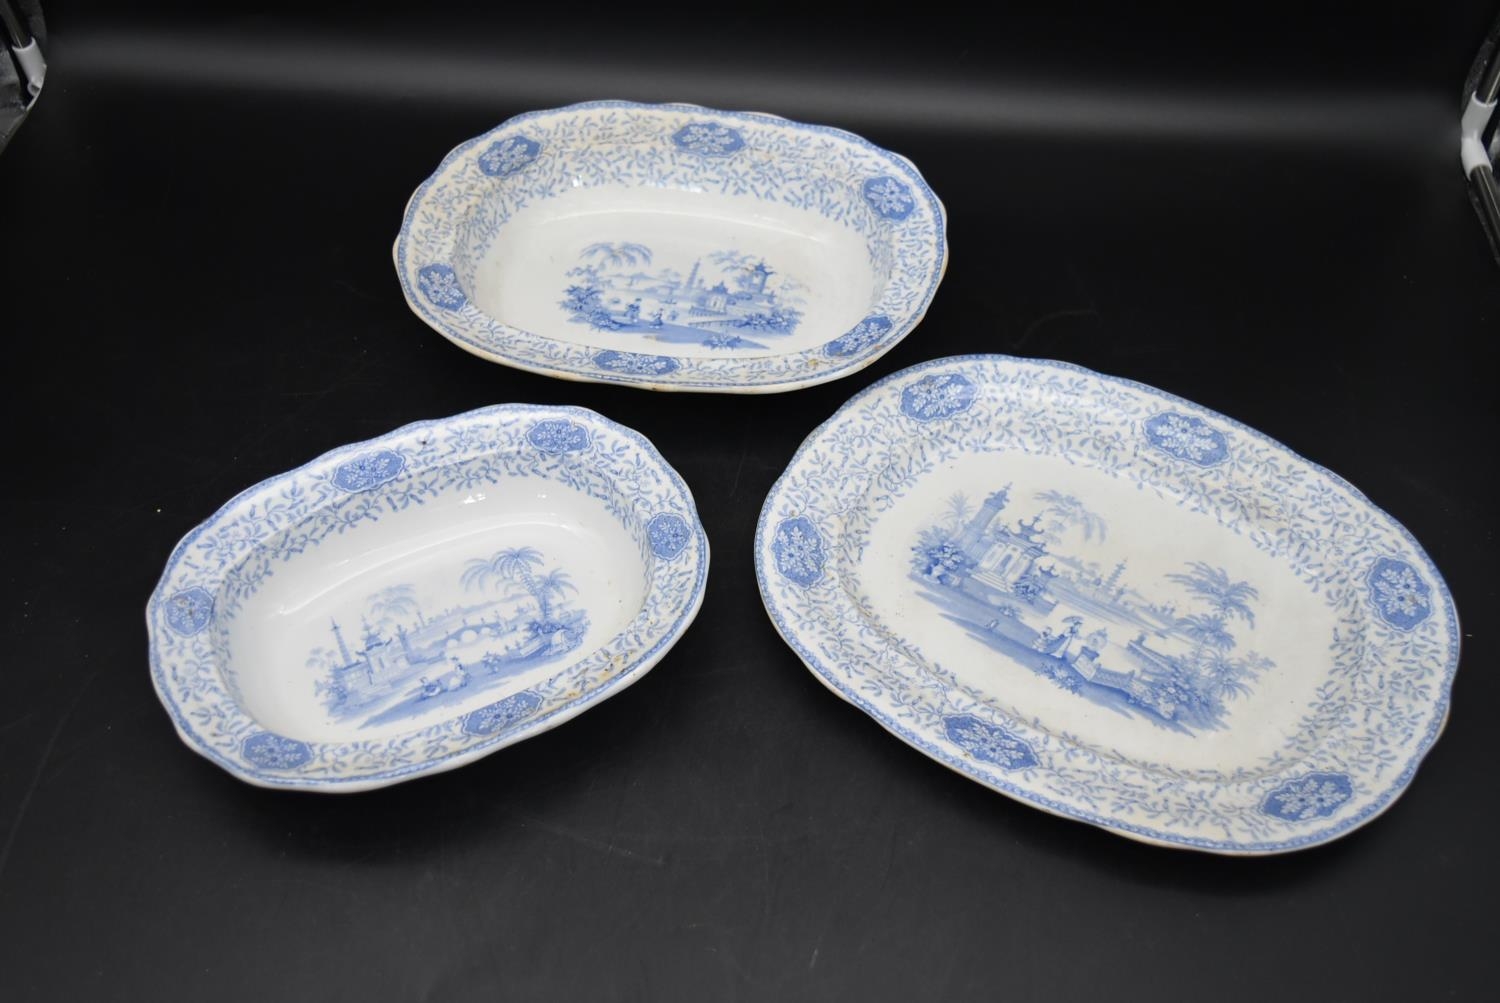 A set of three early 20th century Davenport serving bowls, 'Erica' decorated with foliate garden